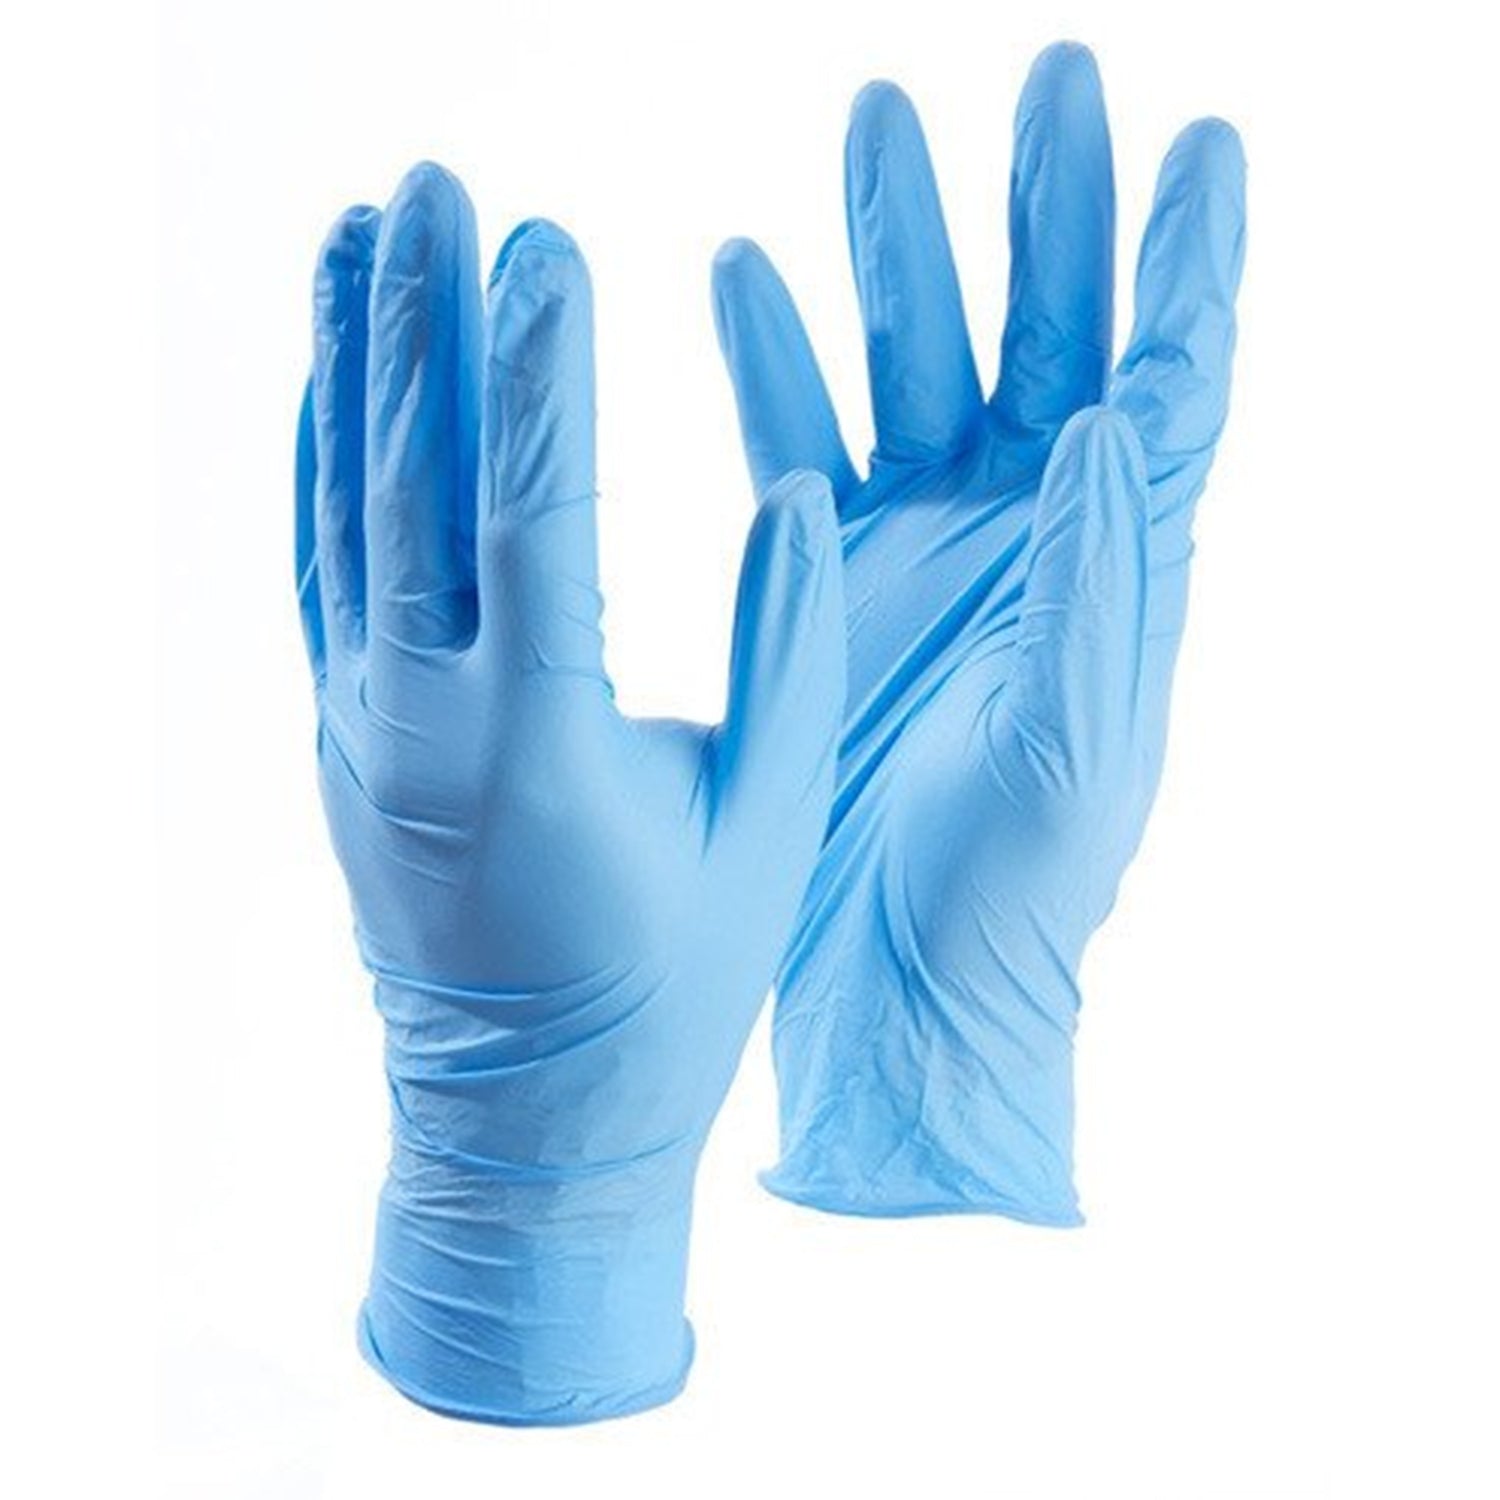 Premier AF Nitrile Examination Gloves | Sterile | Latex Free | XLarge | Pack of 50 Pairs | Short Expiry Date (5)